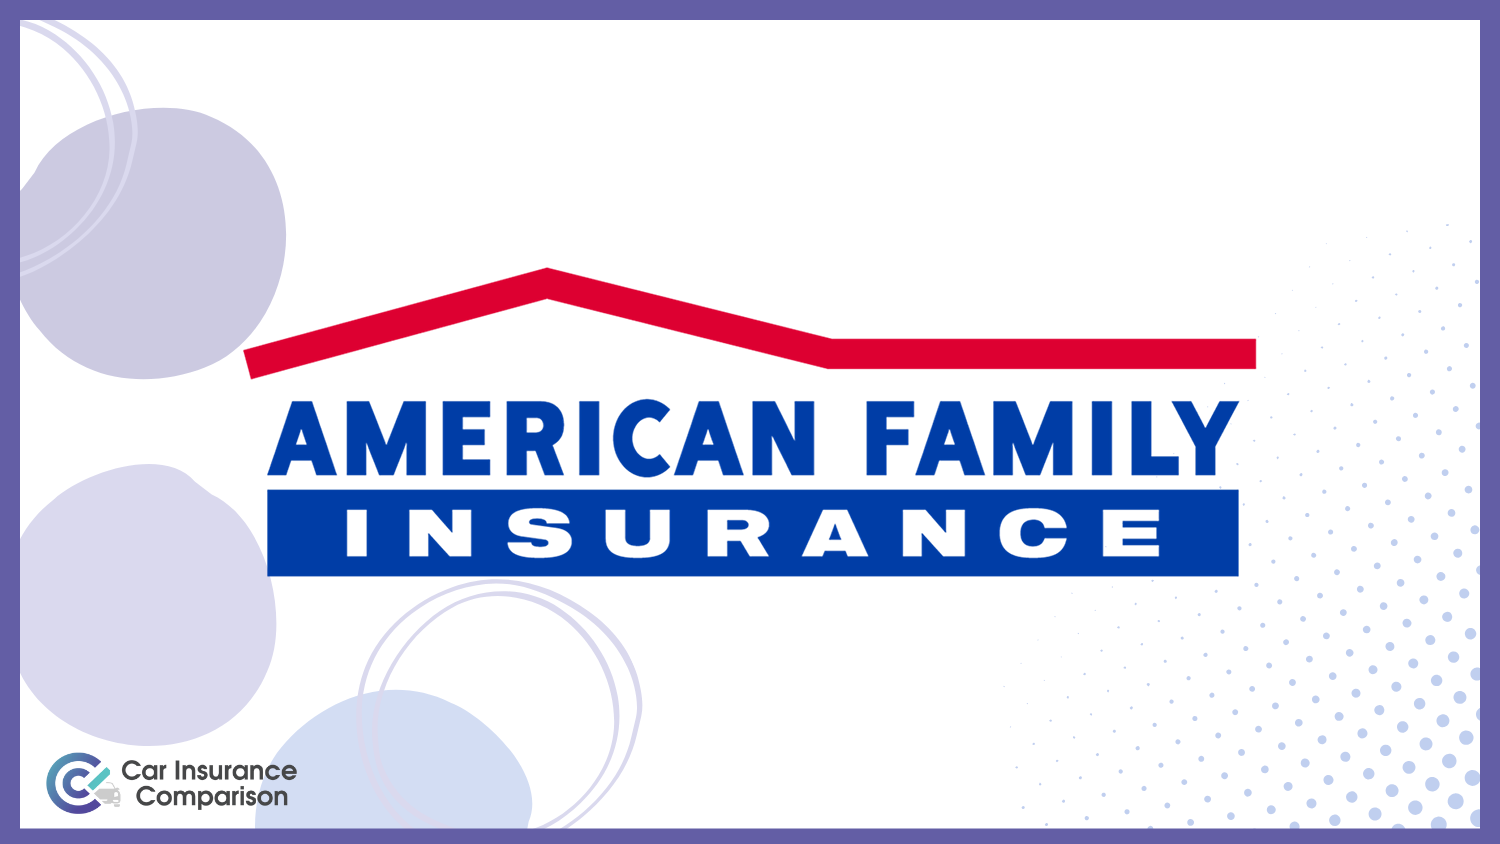 American Family: Compare Best Commercial Car Insurance Companies